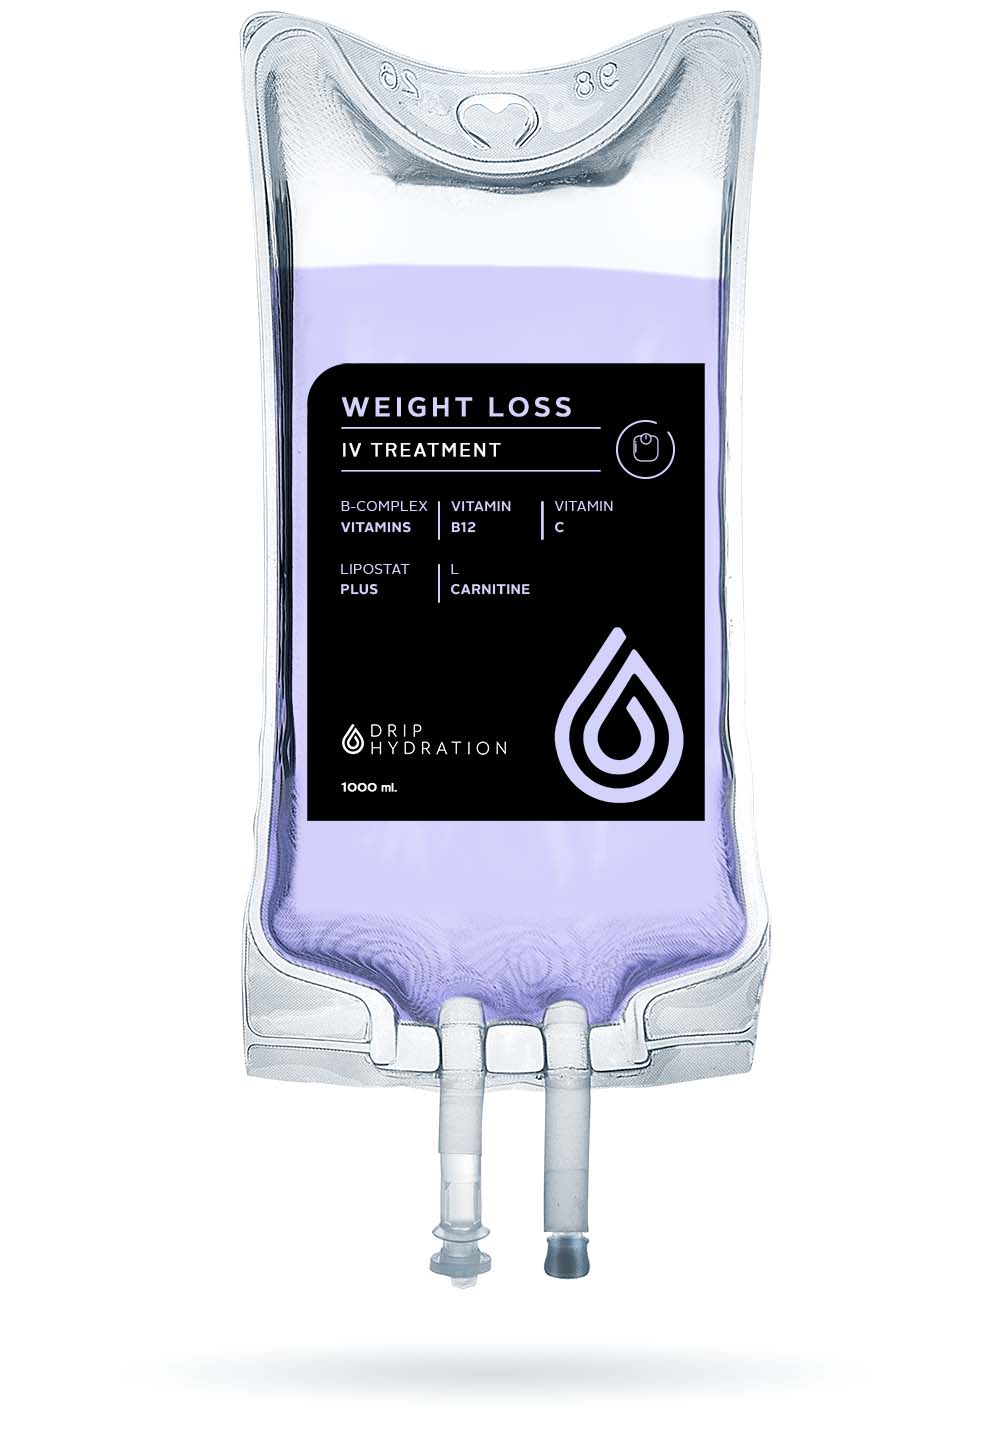 infusion bag named Weight Loss linking toward the service page